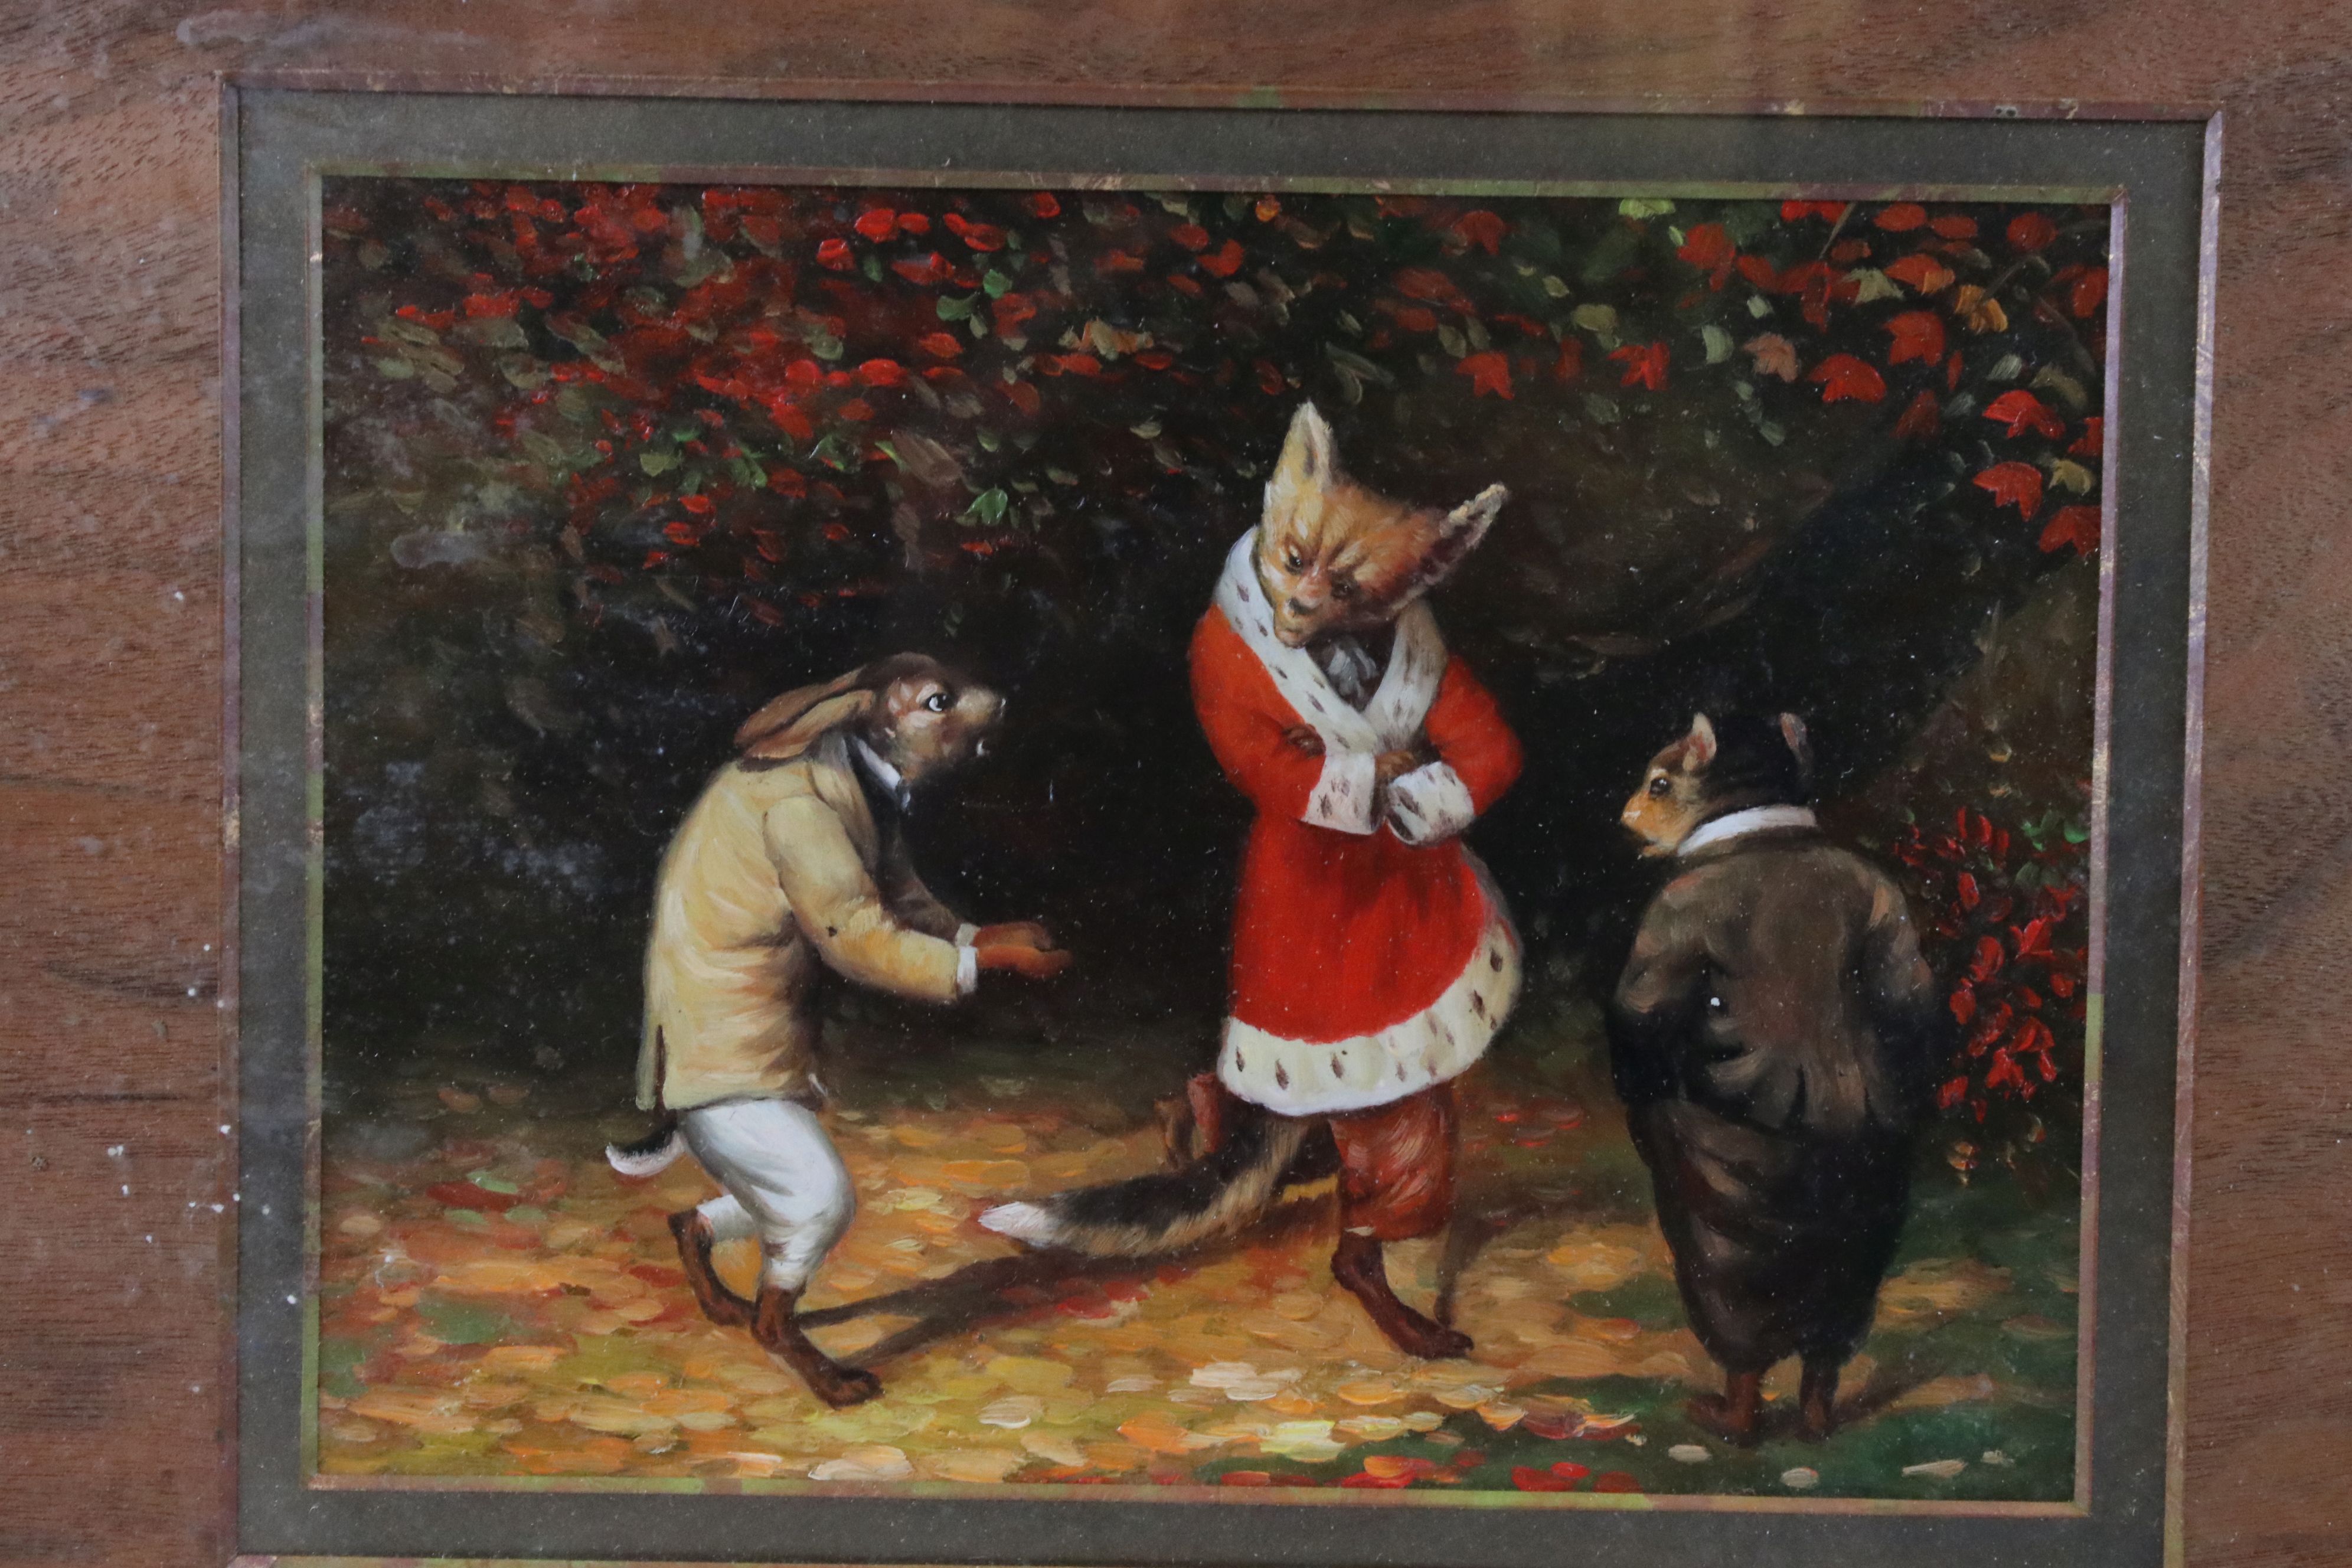 Framed oil painting, a satirical scene of animals dressed in clothing, a fox, a rabbit & a rat - Image 3 of 4